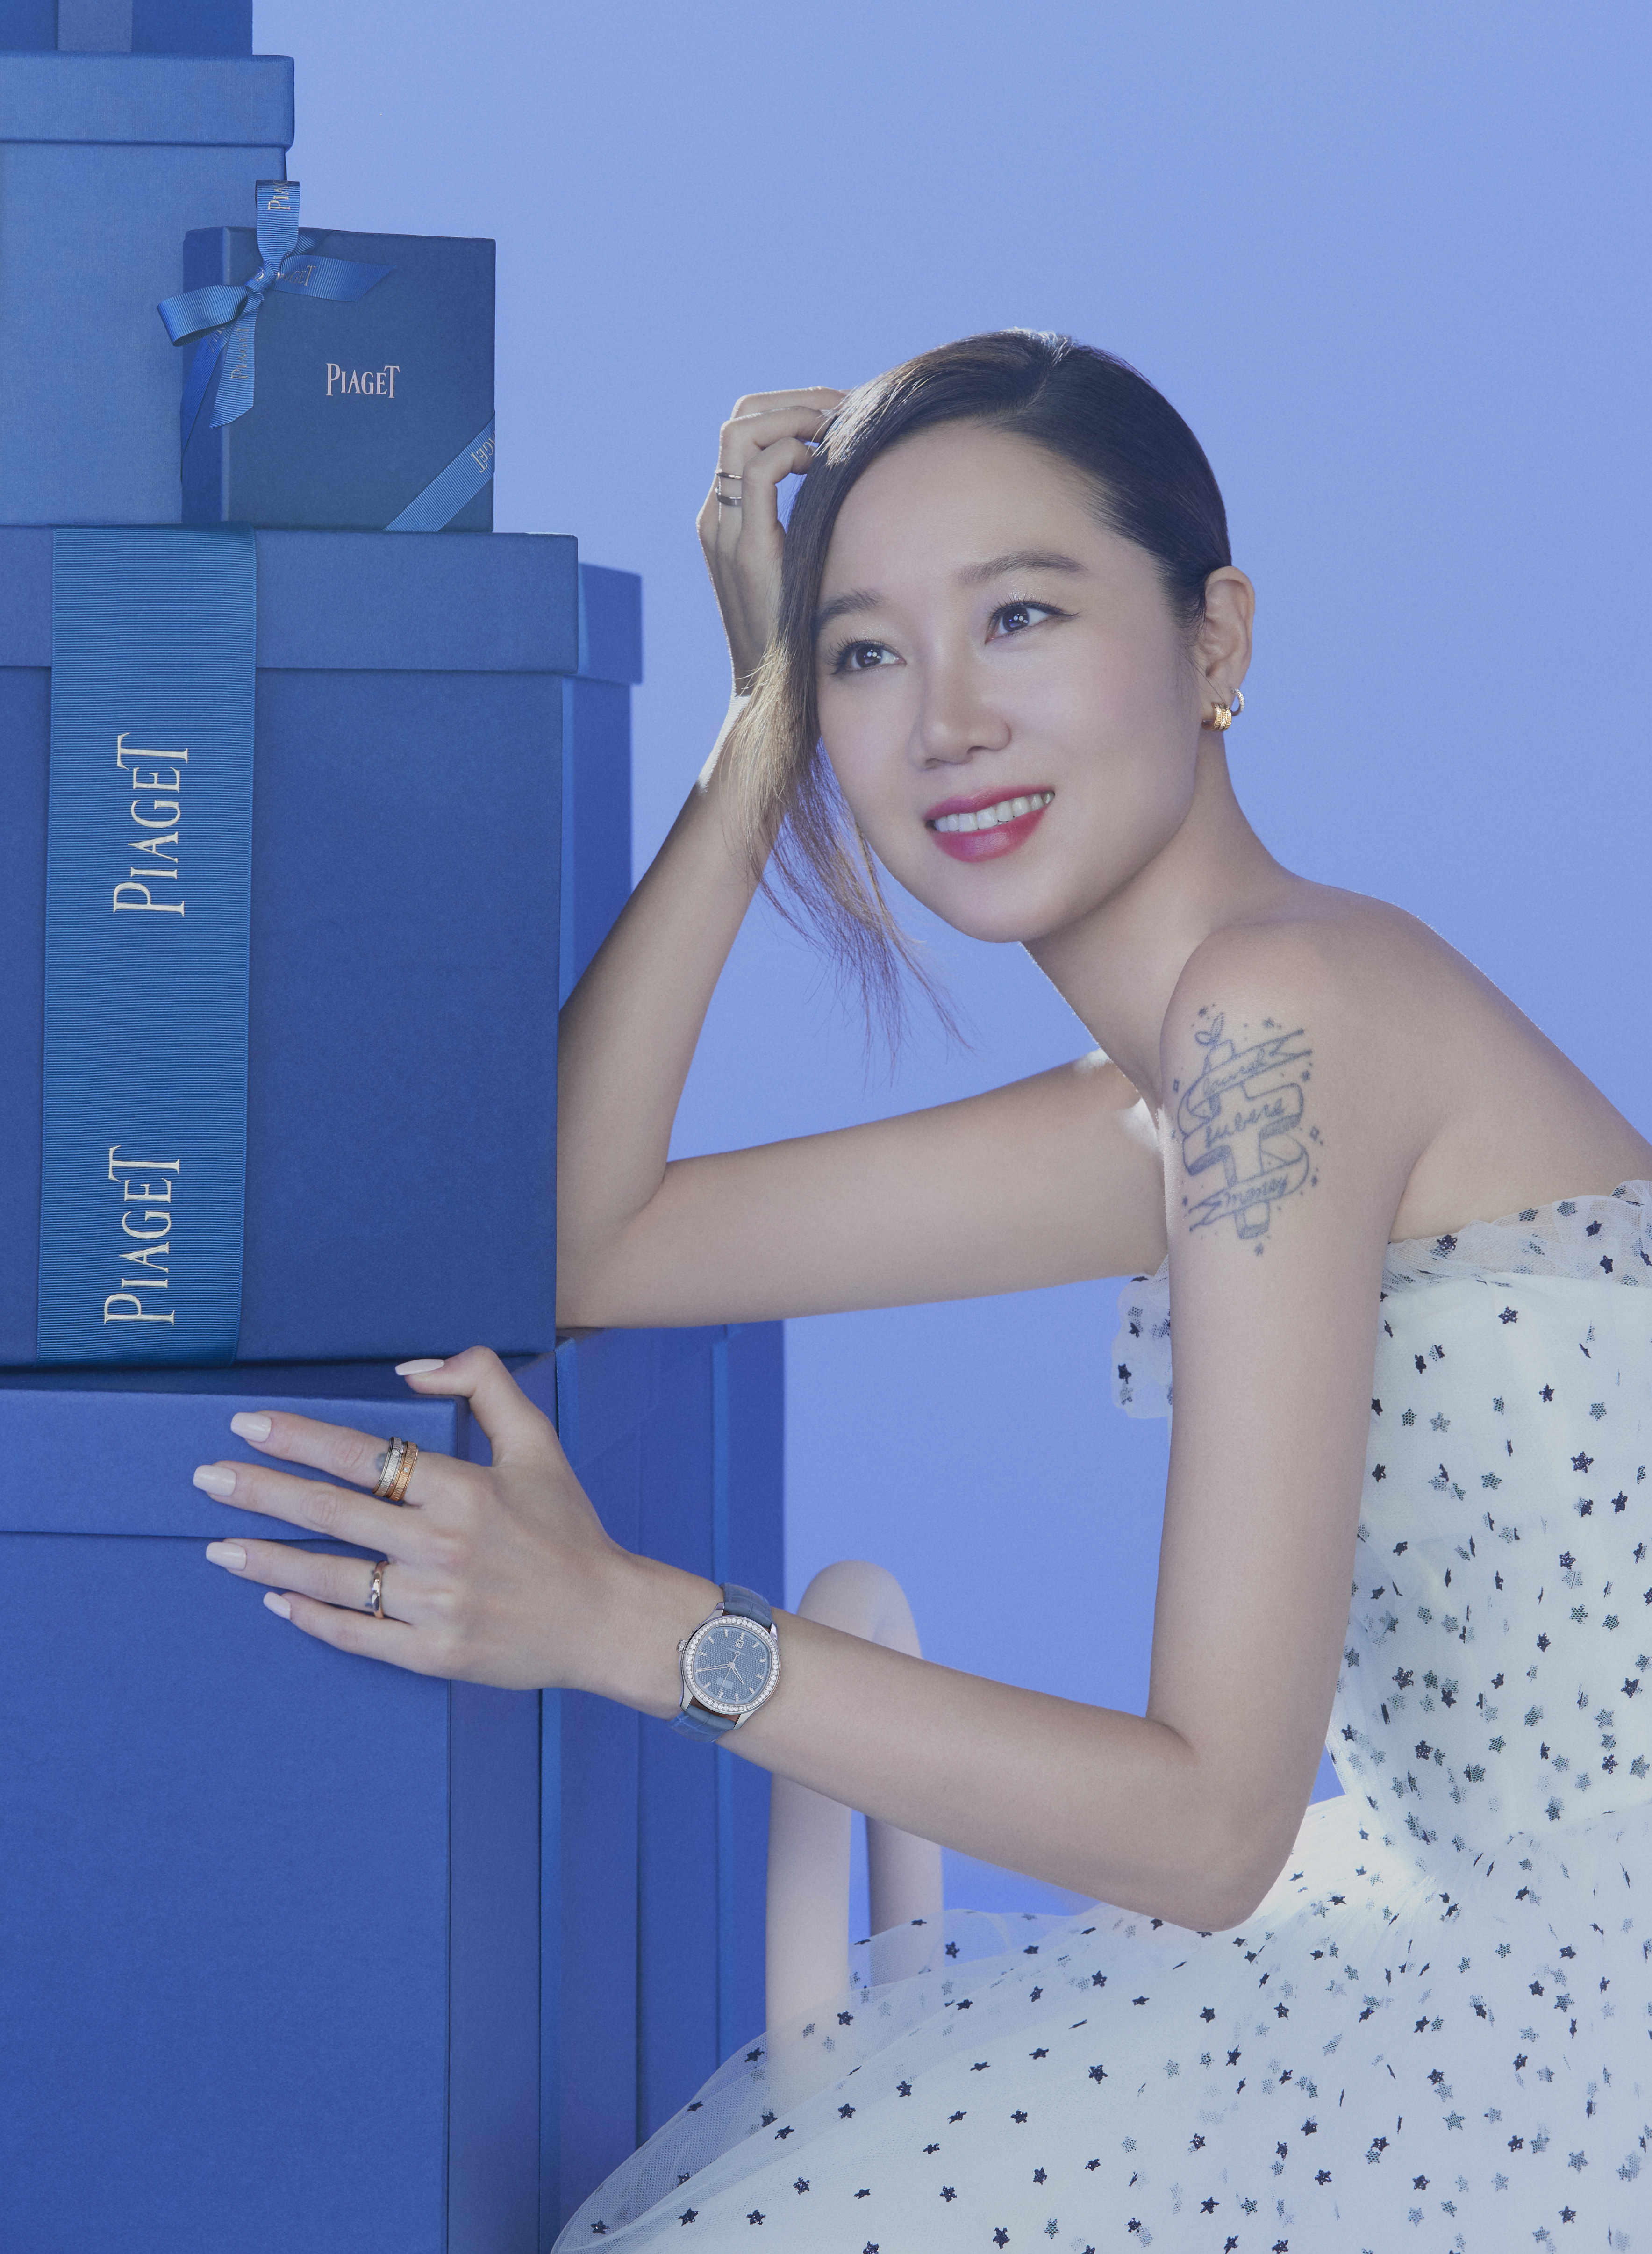 AFO RADIO - Piaget celebrates a summery beach encounter with Kong Hyo Jin, Brand  Ambassador for Asia Pacific